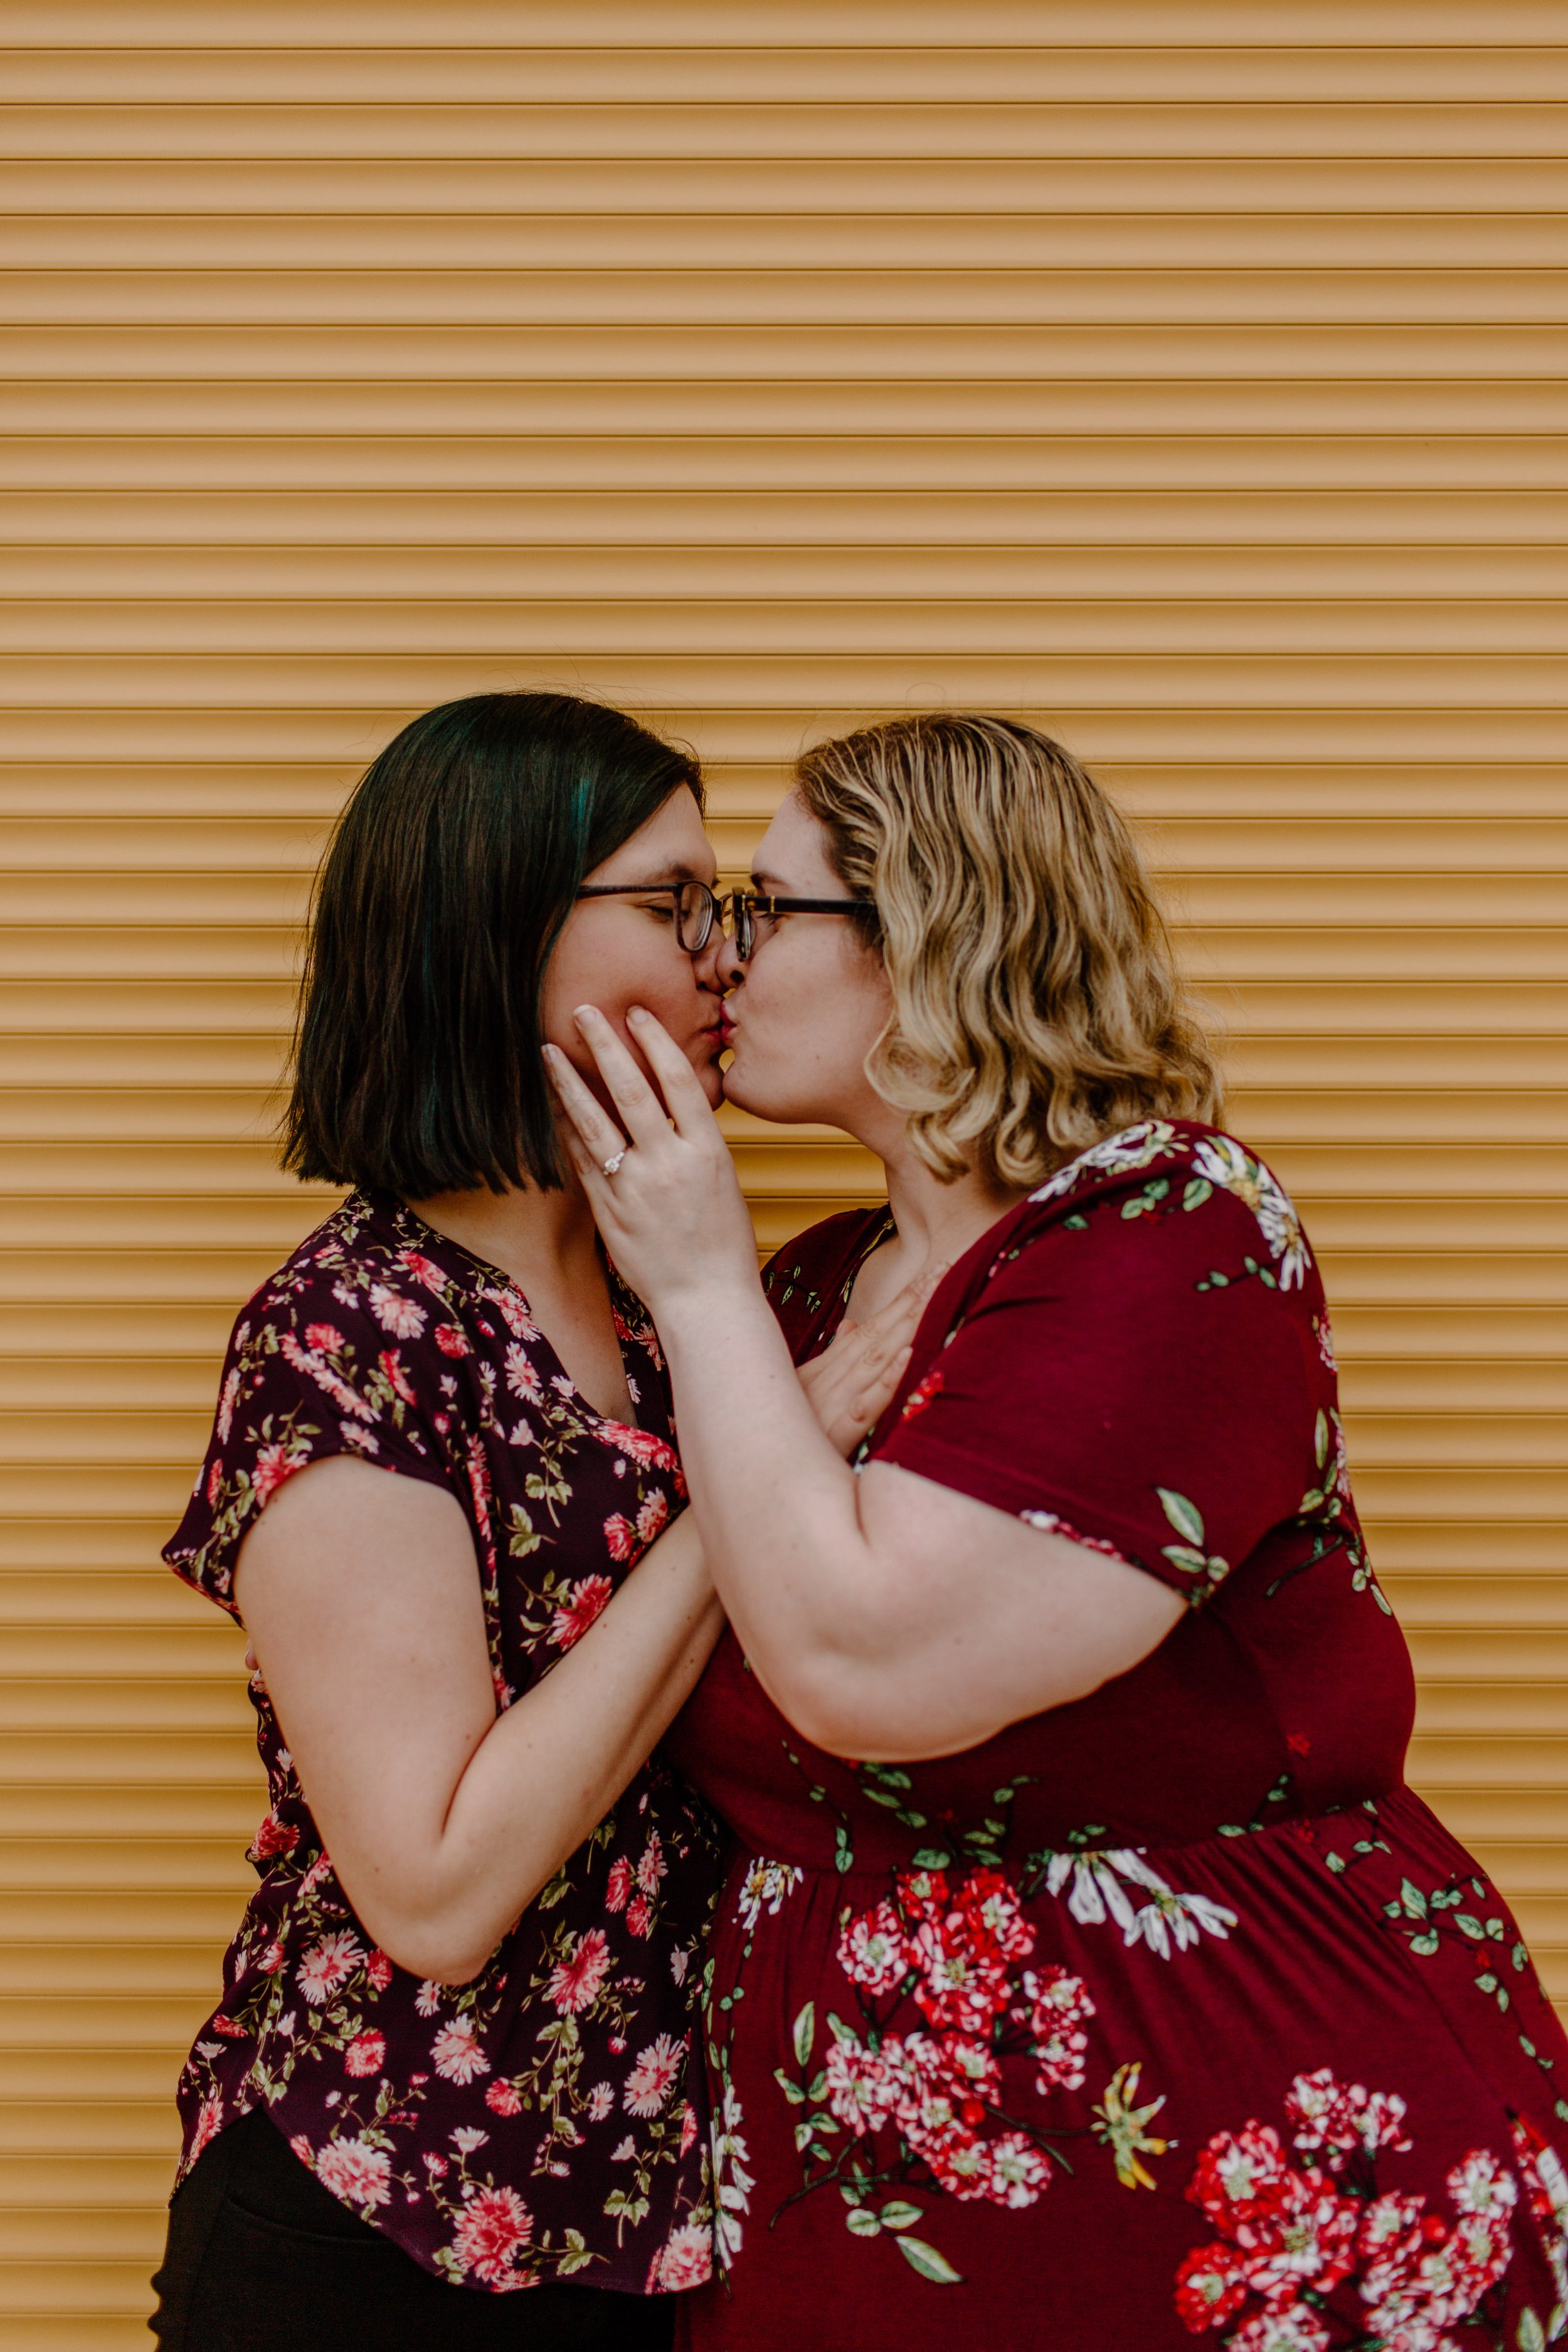  Lesbian couple kiss in front of a yellow wall after one has proposed to the other in Tucson Arizona 